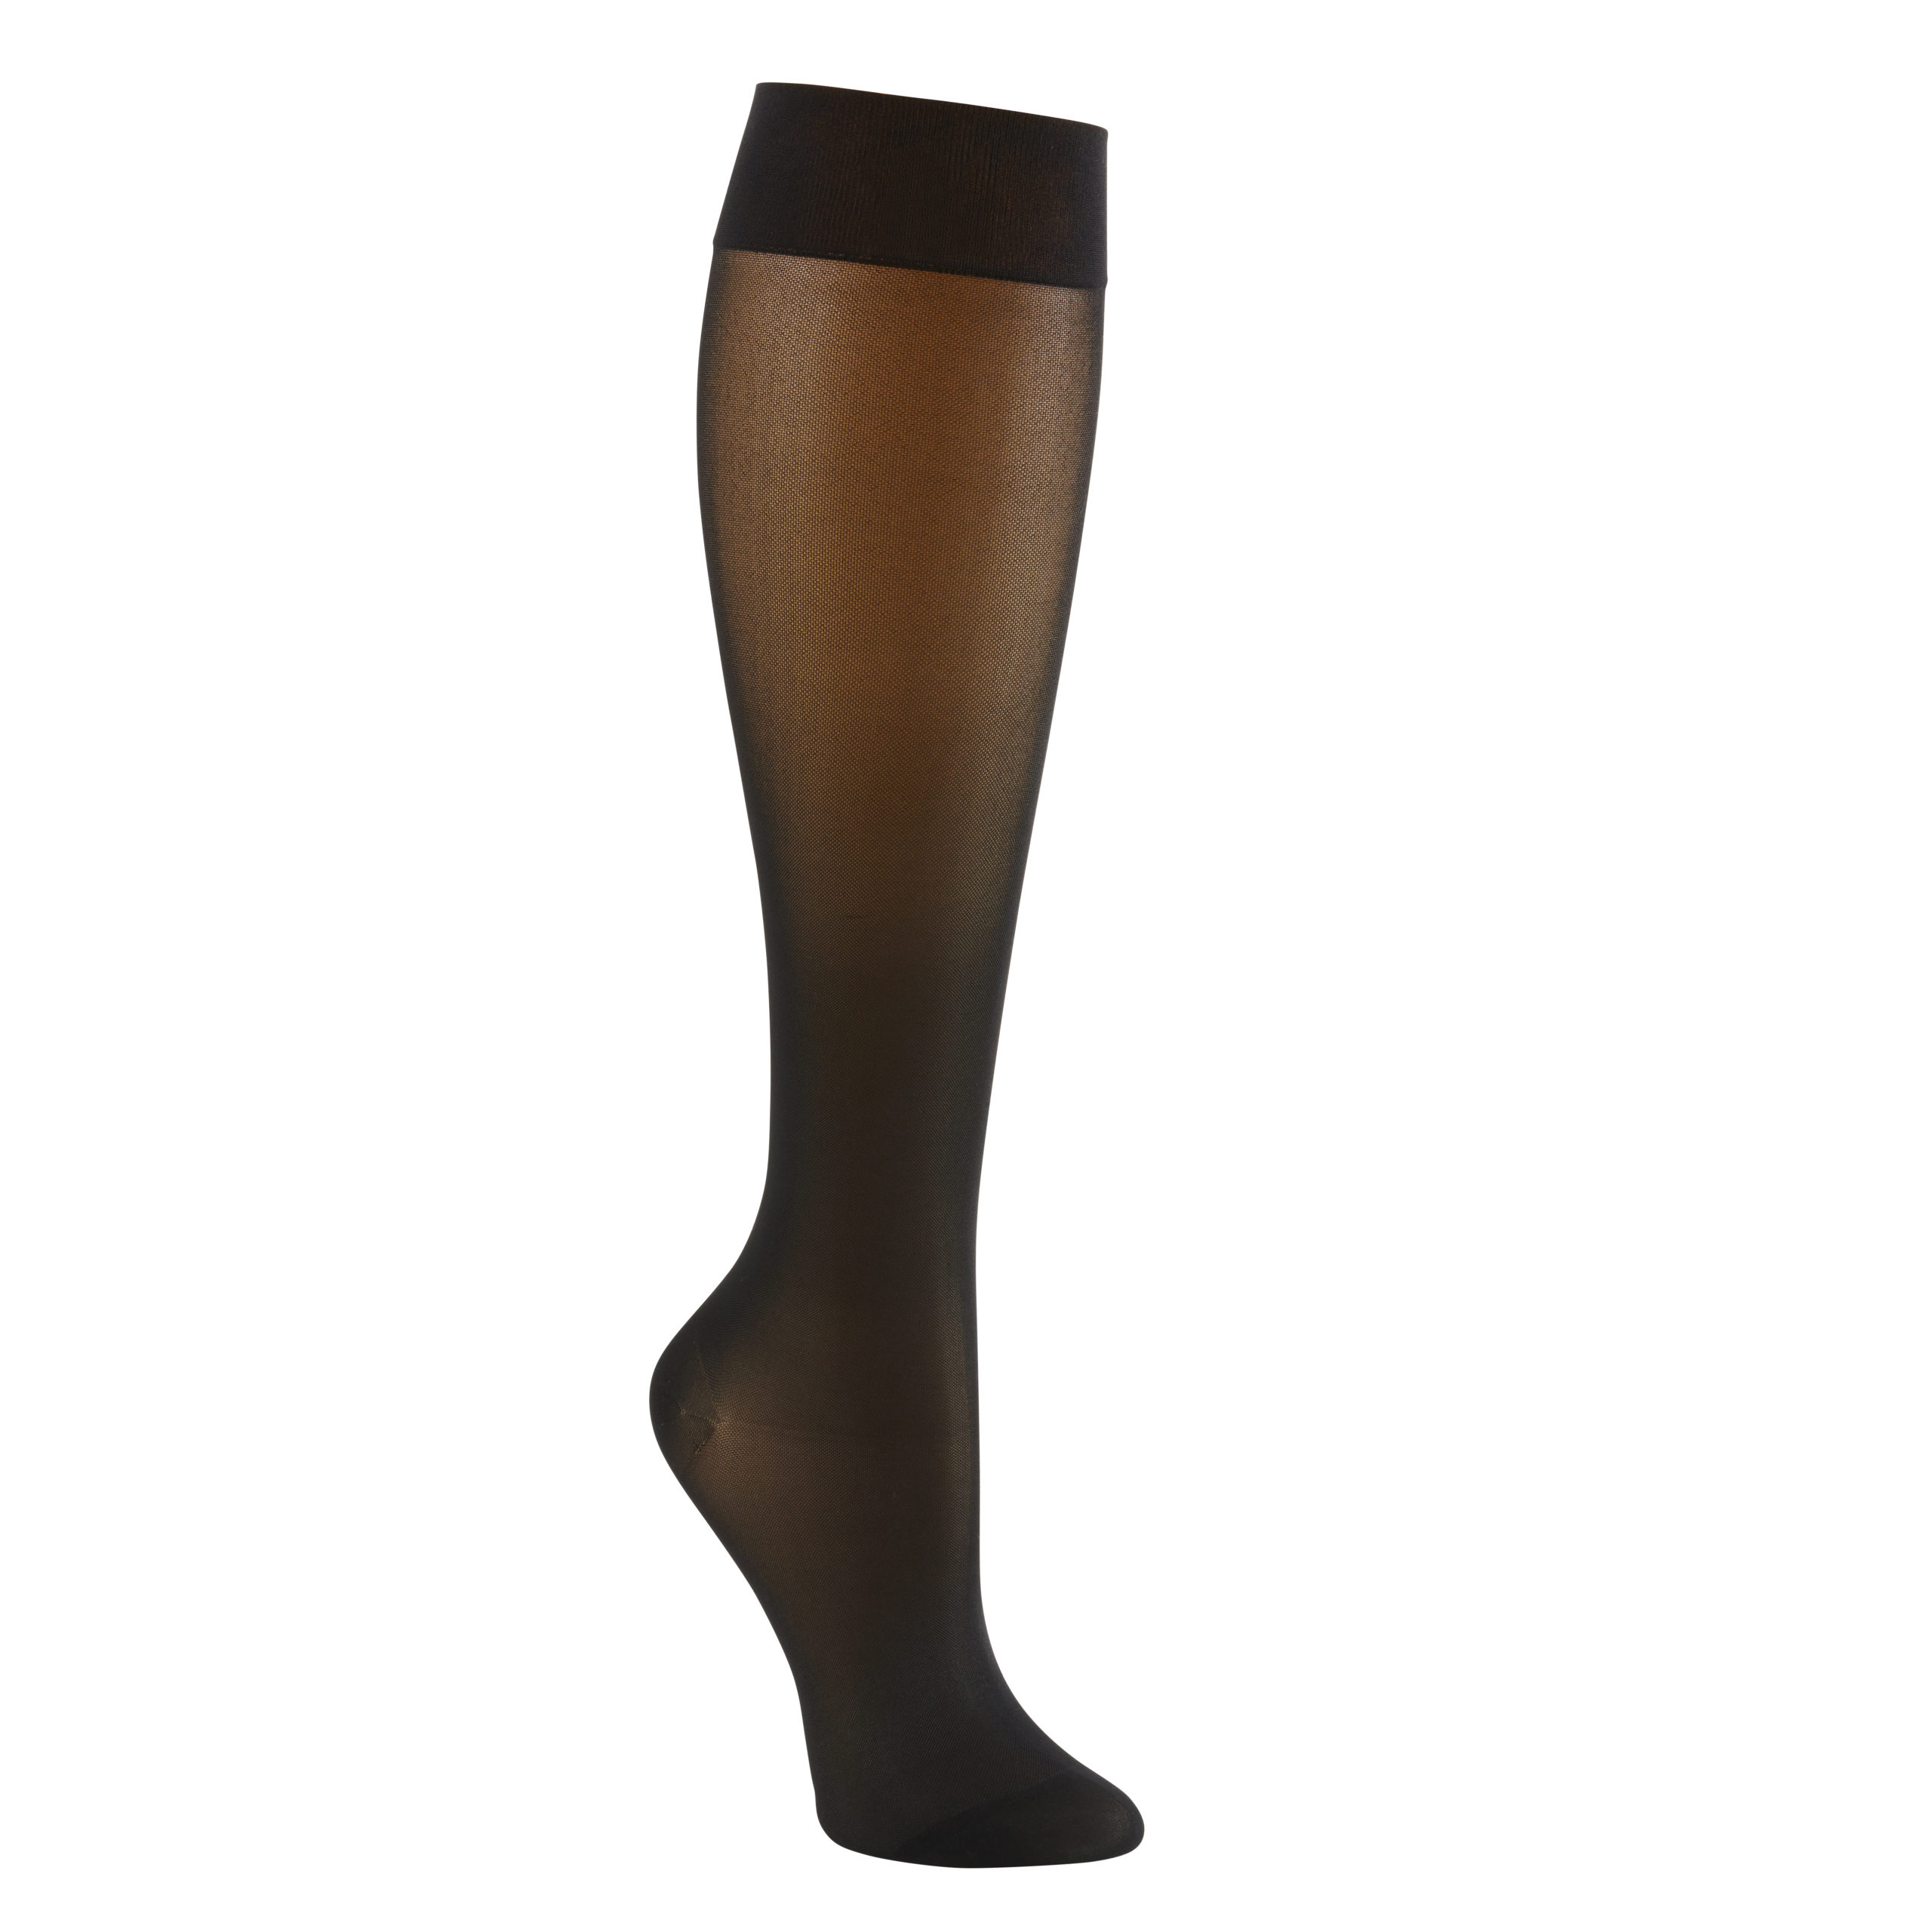 Worker Knee-High 15-20mmHg Compression Socks - Supporo